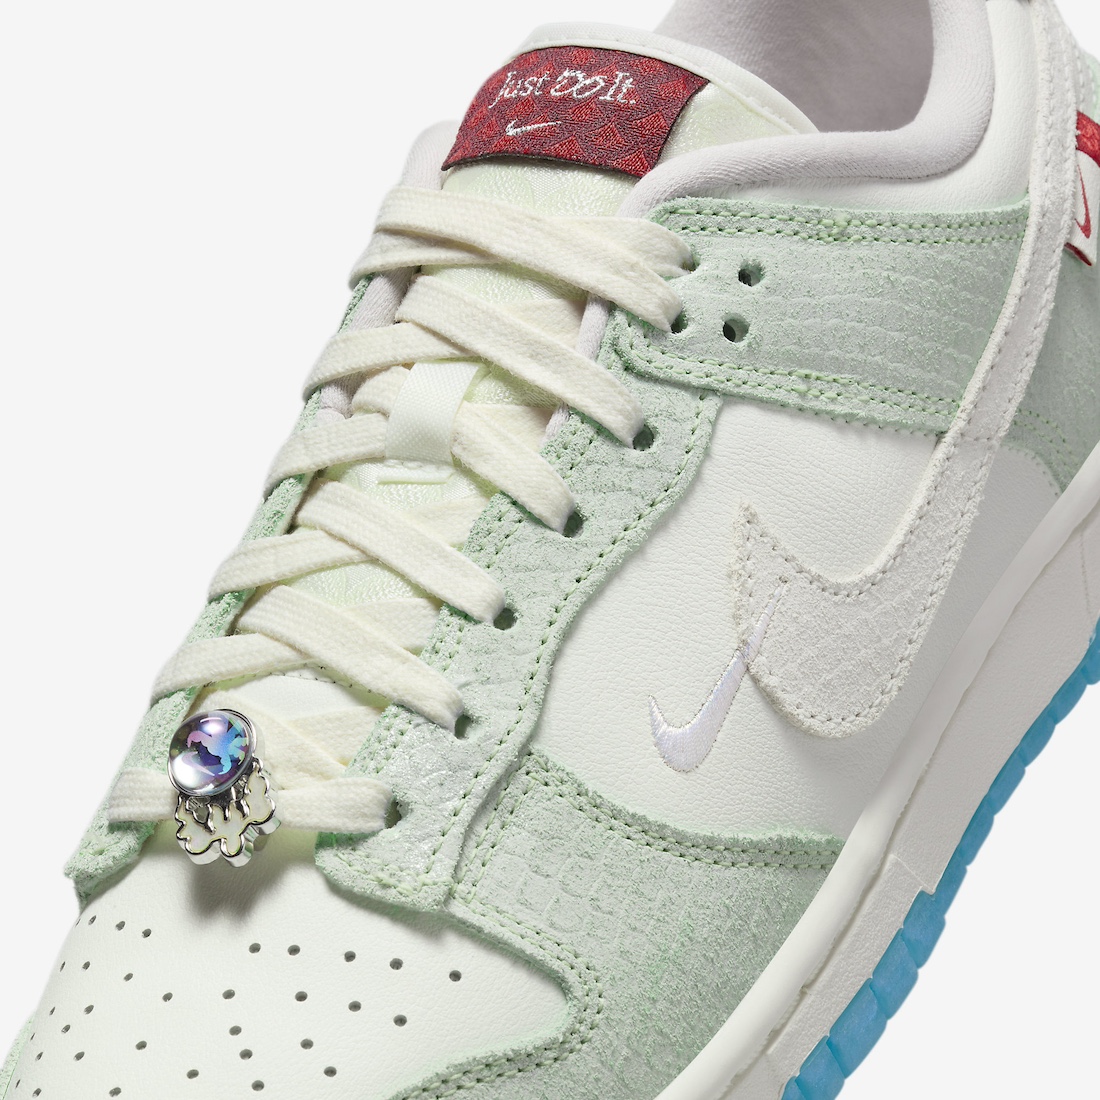 Nike Dunk Low Just Do It Dusty Cactus FZ5065-111